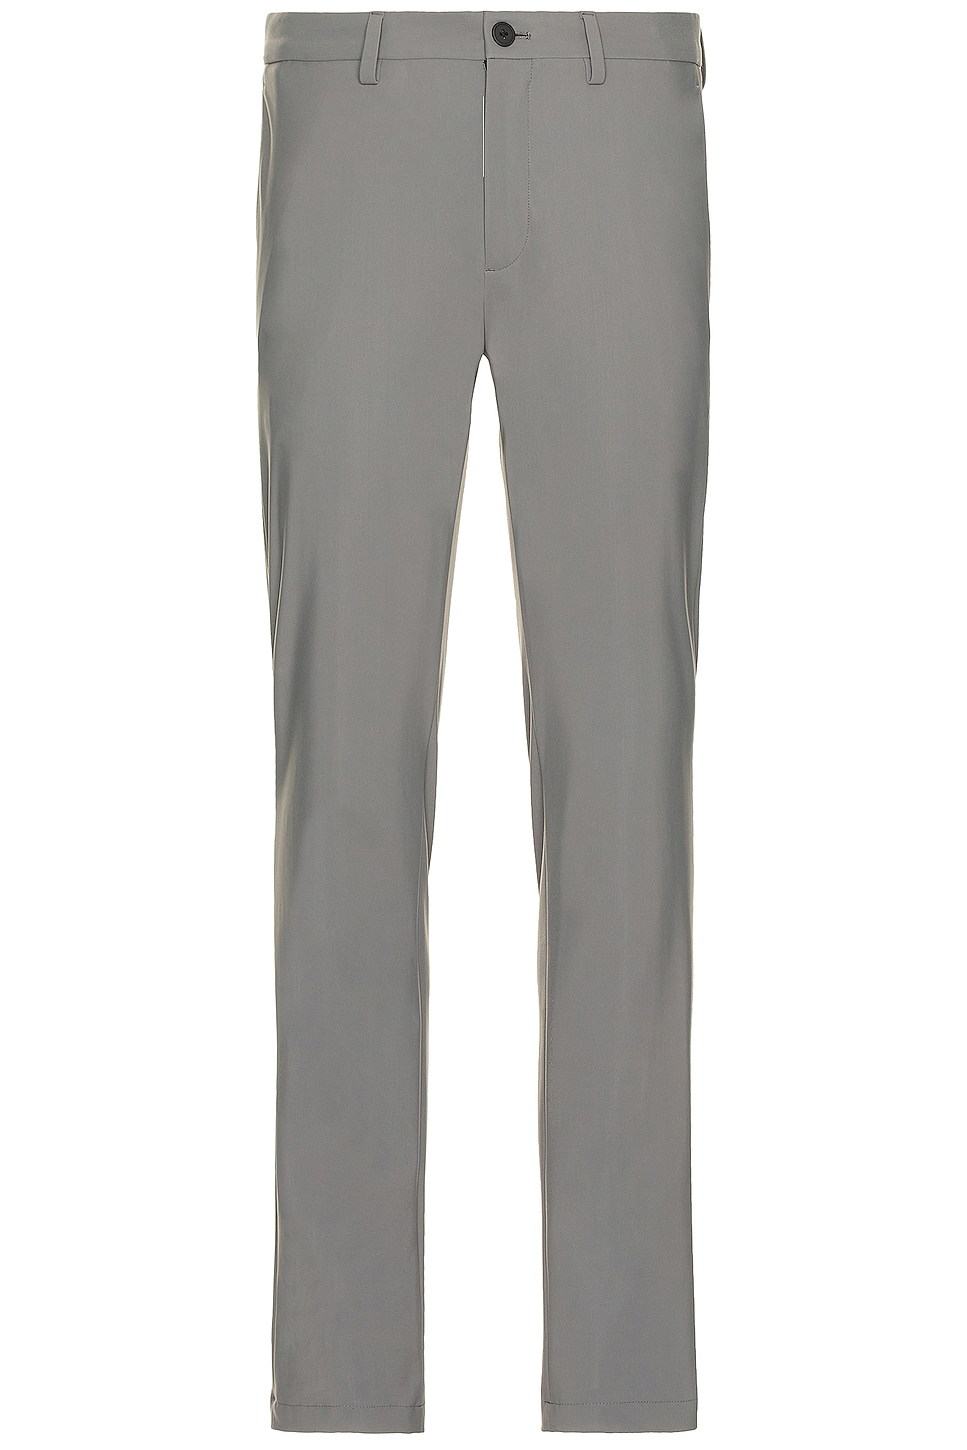 Image 1 of Theory Zaine Pants in Stone